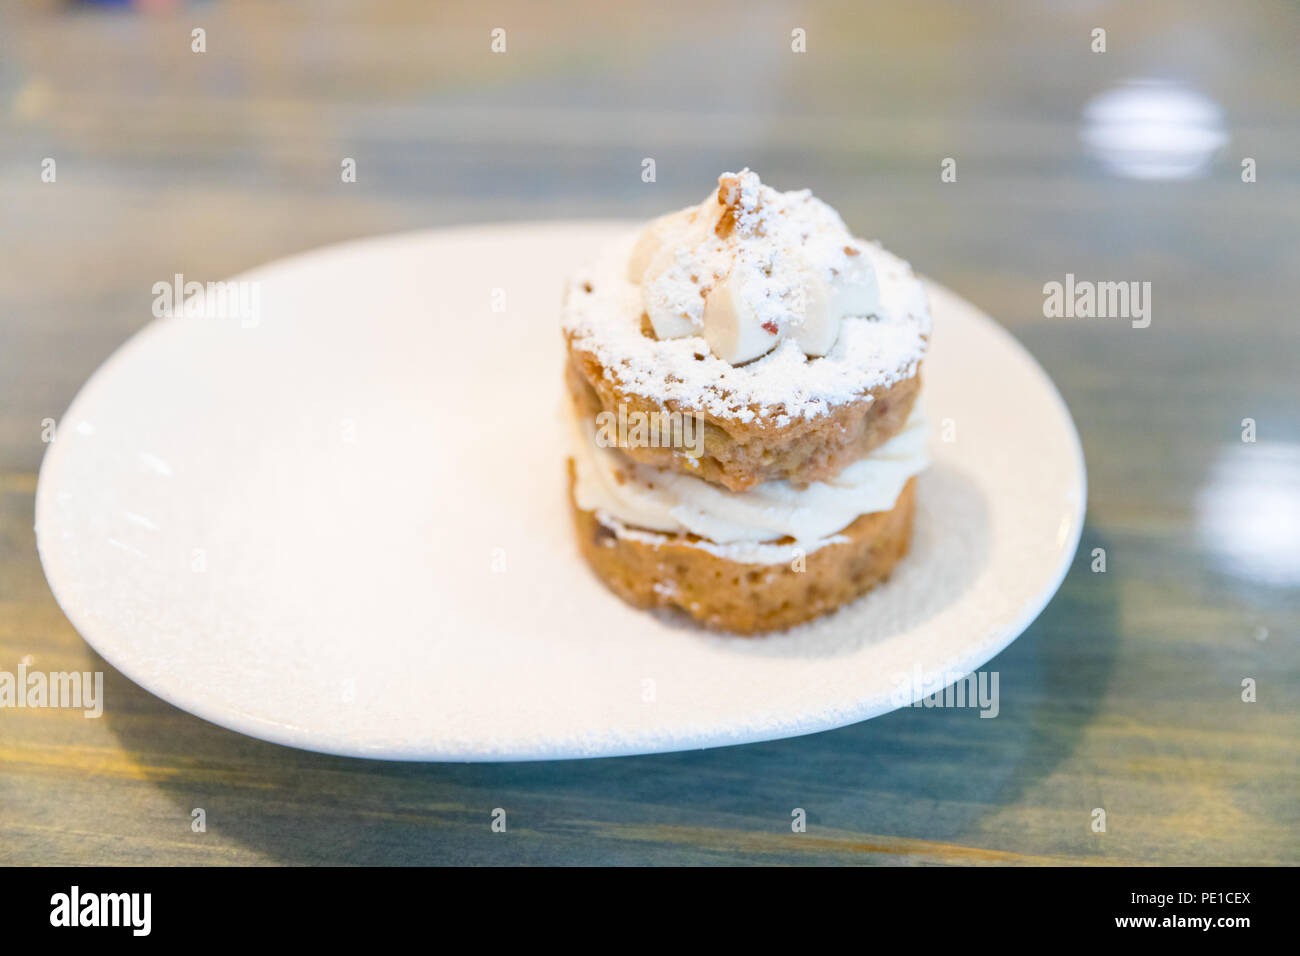 Homemade fruity Hummingbird cake with walnuts and cinnamon on the white plate. Stock Photo